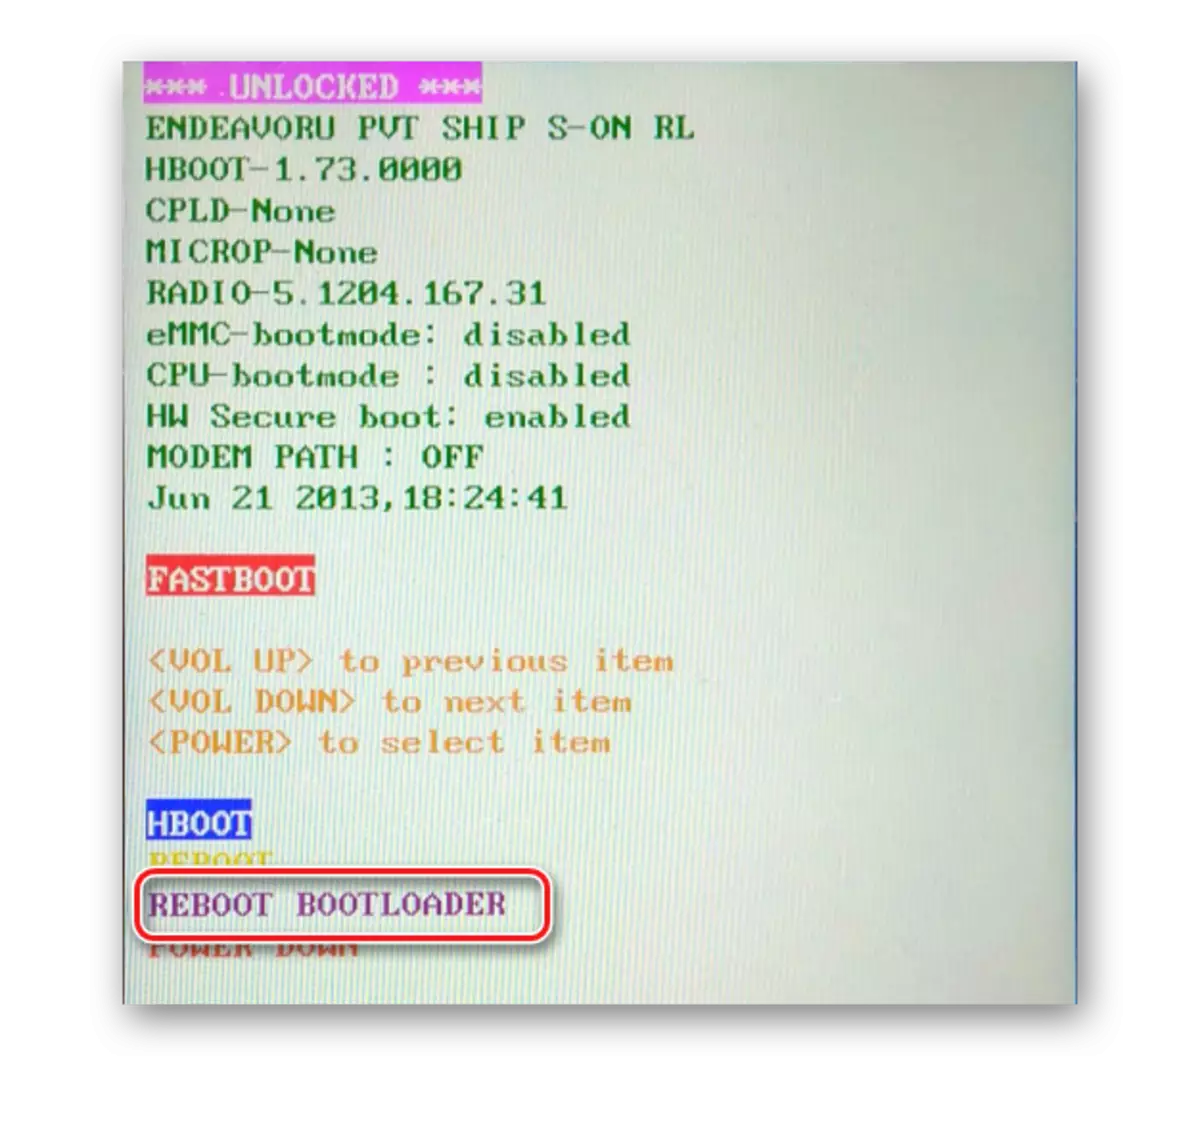 HTC One X (S720E) Reboot Bootloader